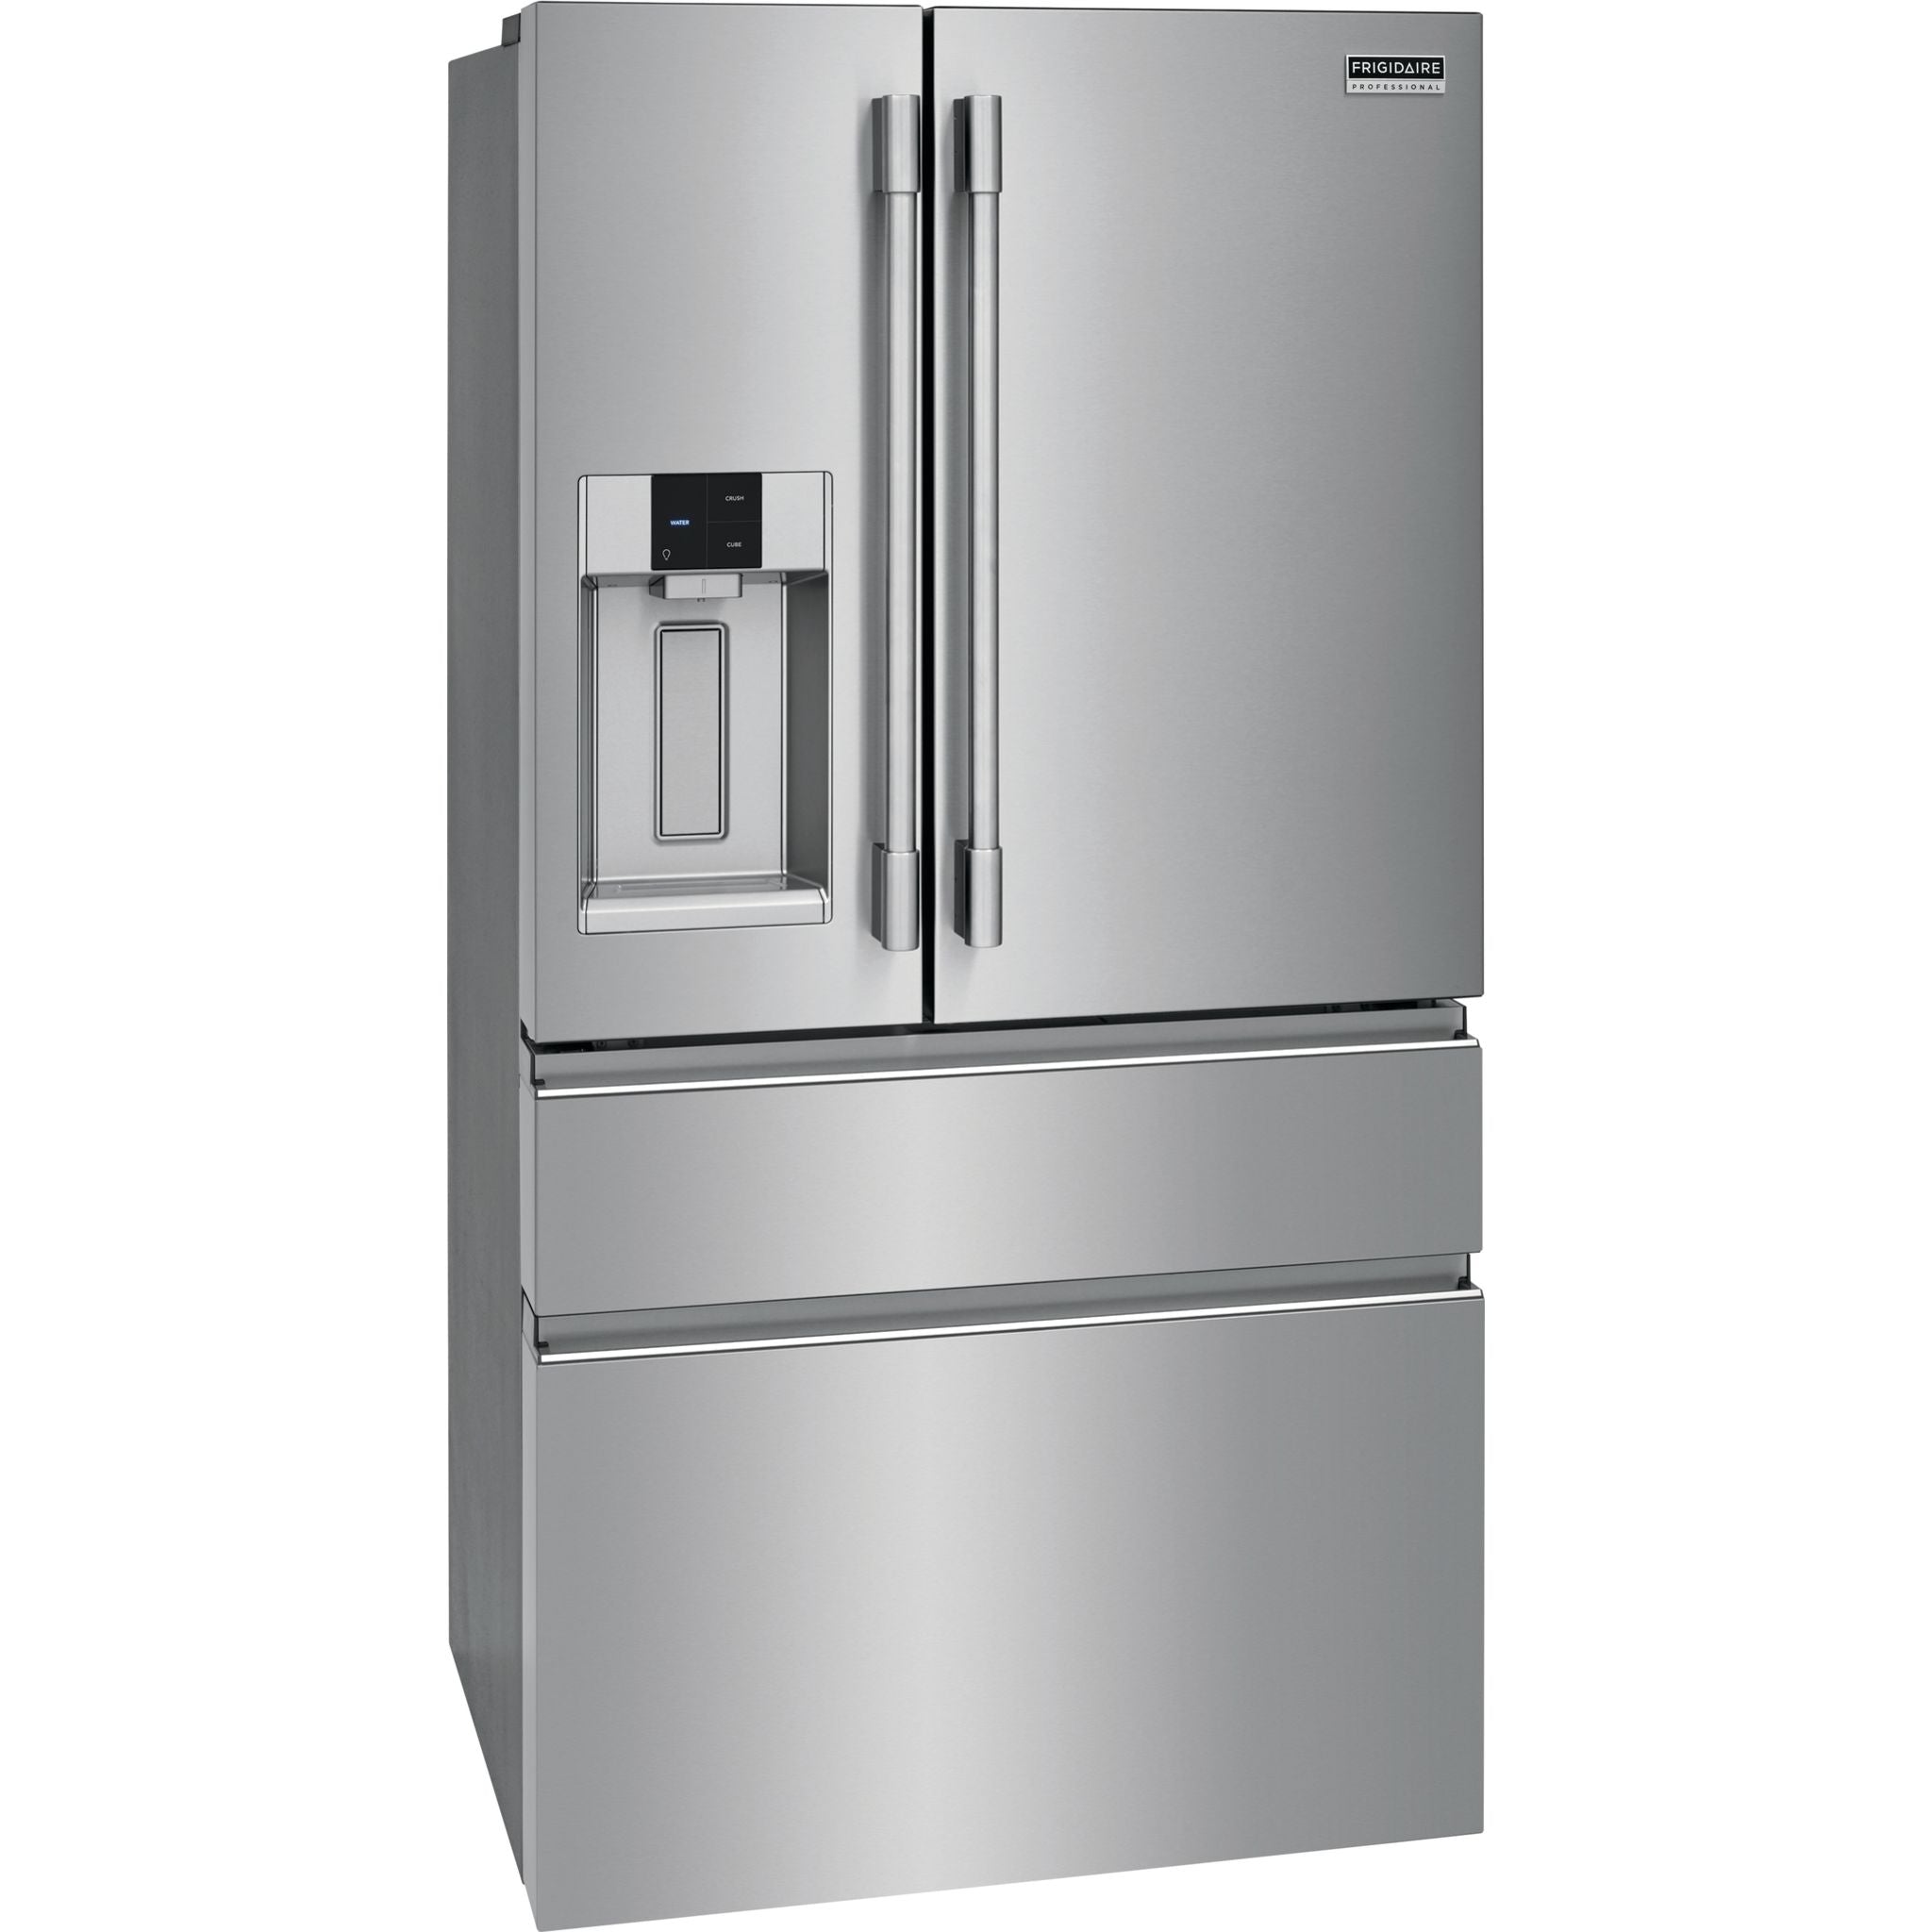 Frigidaire Professional, Frigidaire Professional French Door Fridge (PRMC2285AF) - Stainless Steel